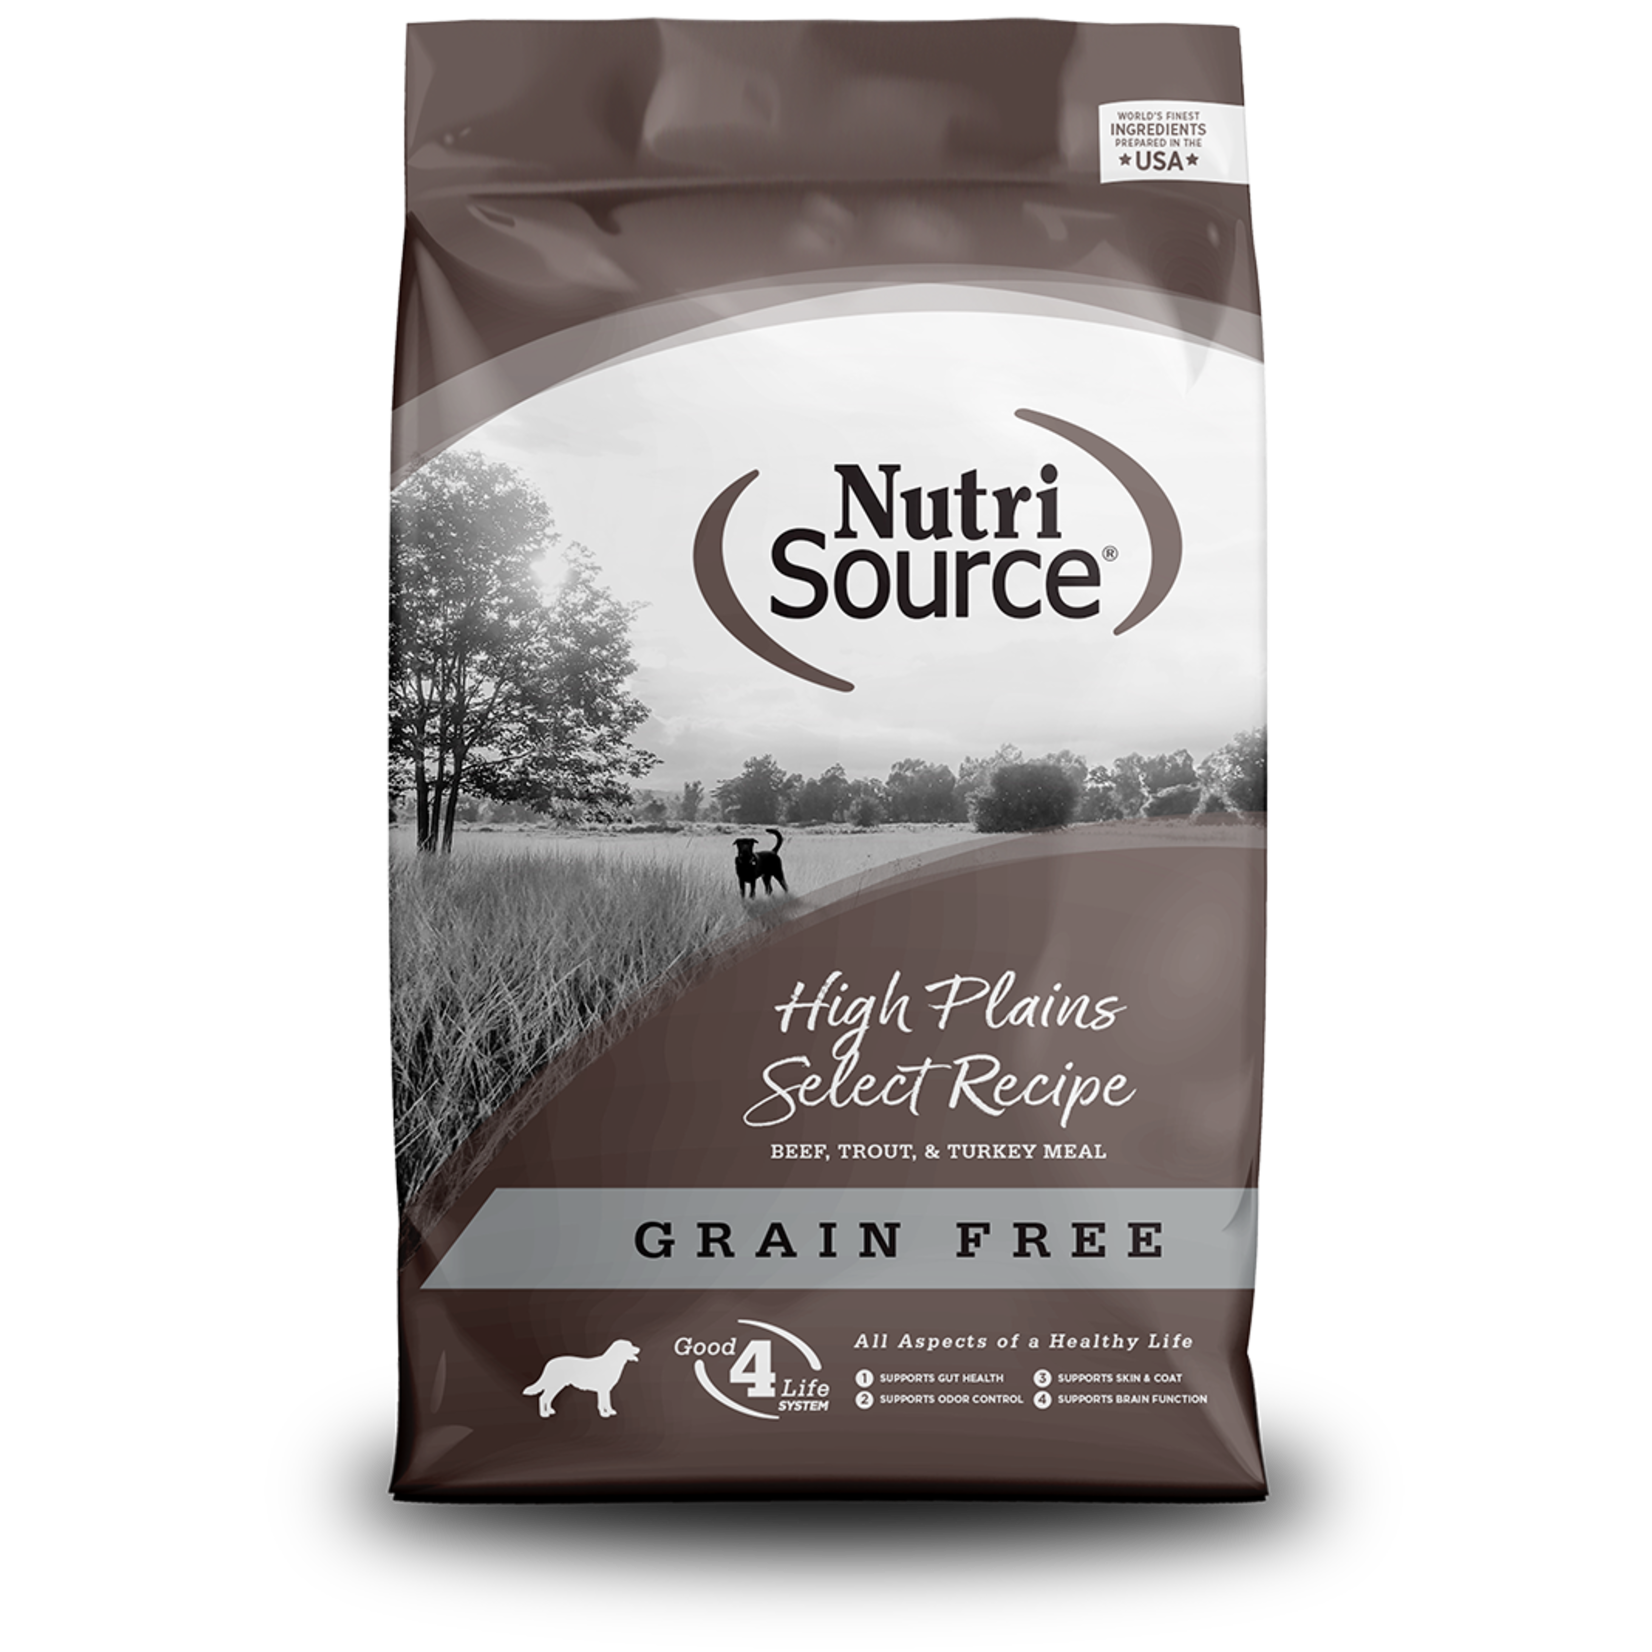 NutriSource NutriSource Dry Dog Food High Plains Select Recipe Beef, Trout, & Turkey Meal Grain Free